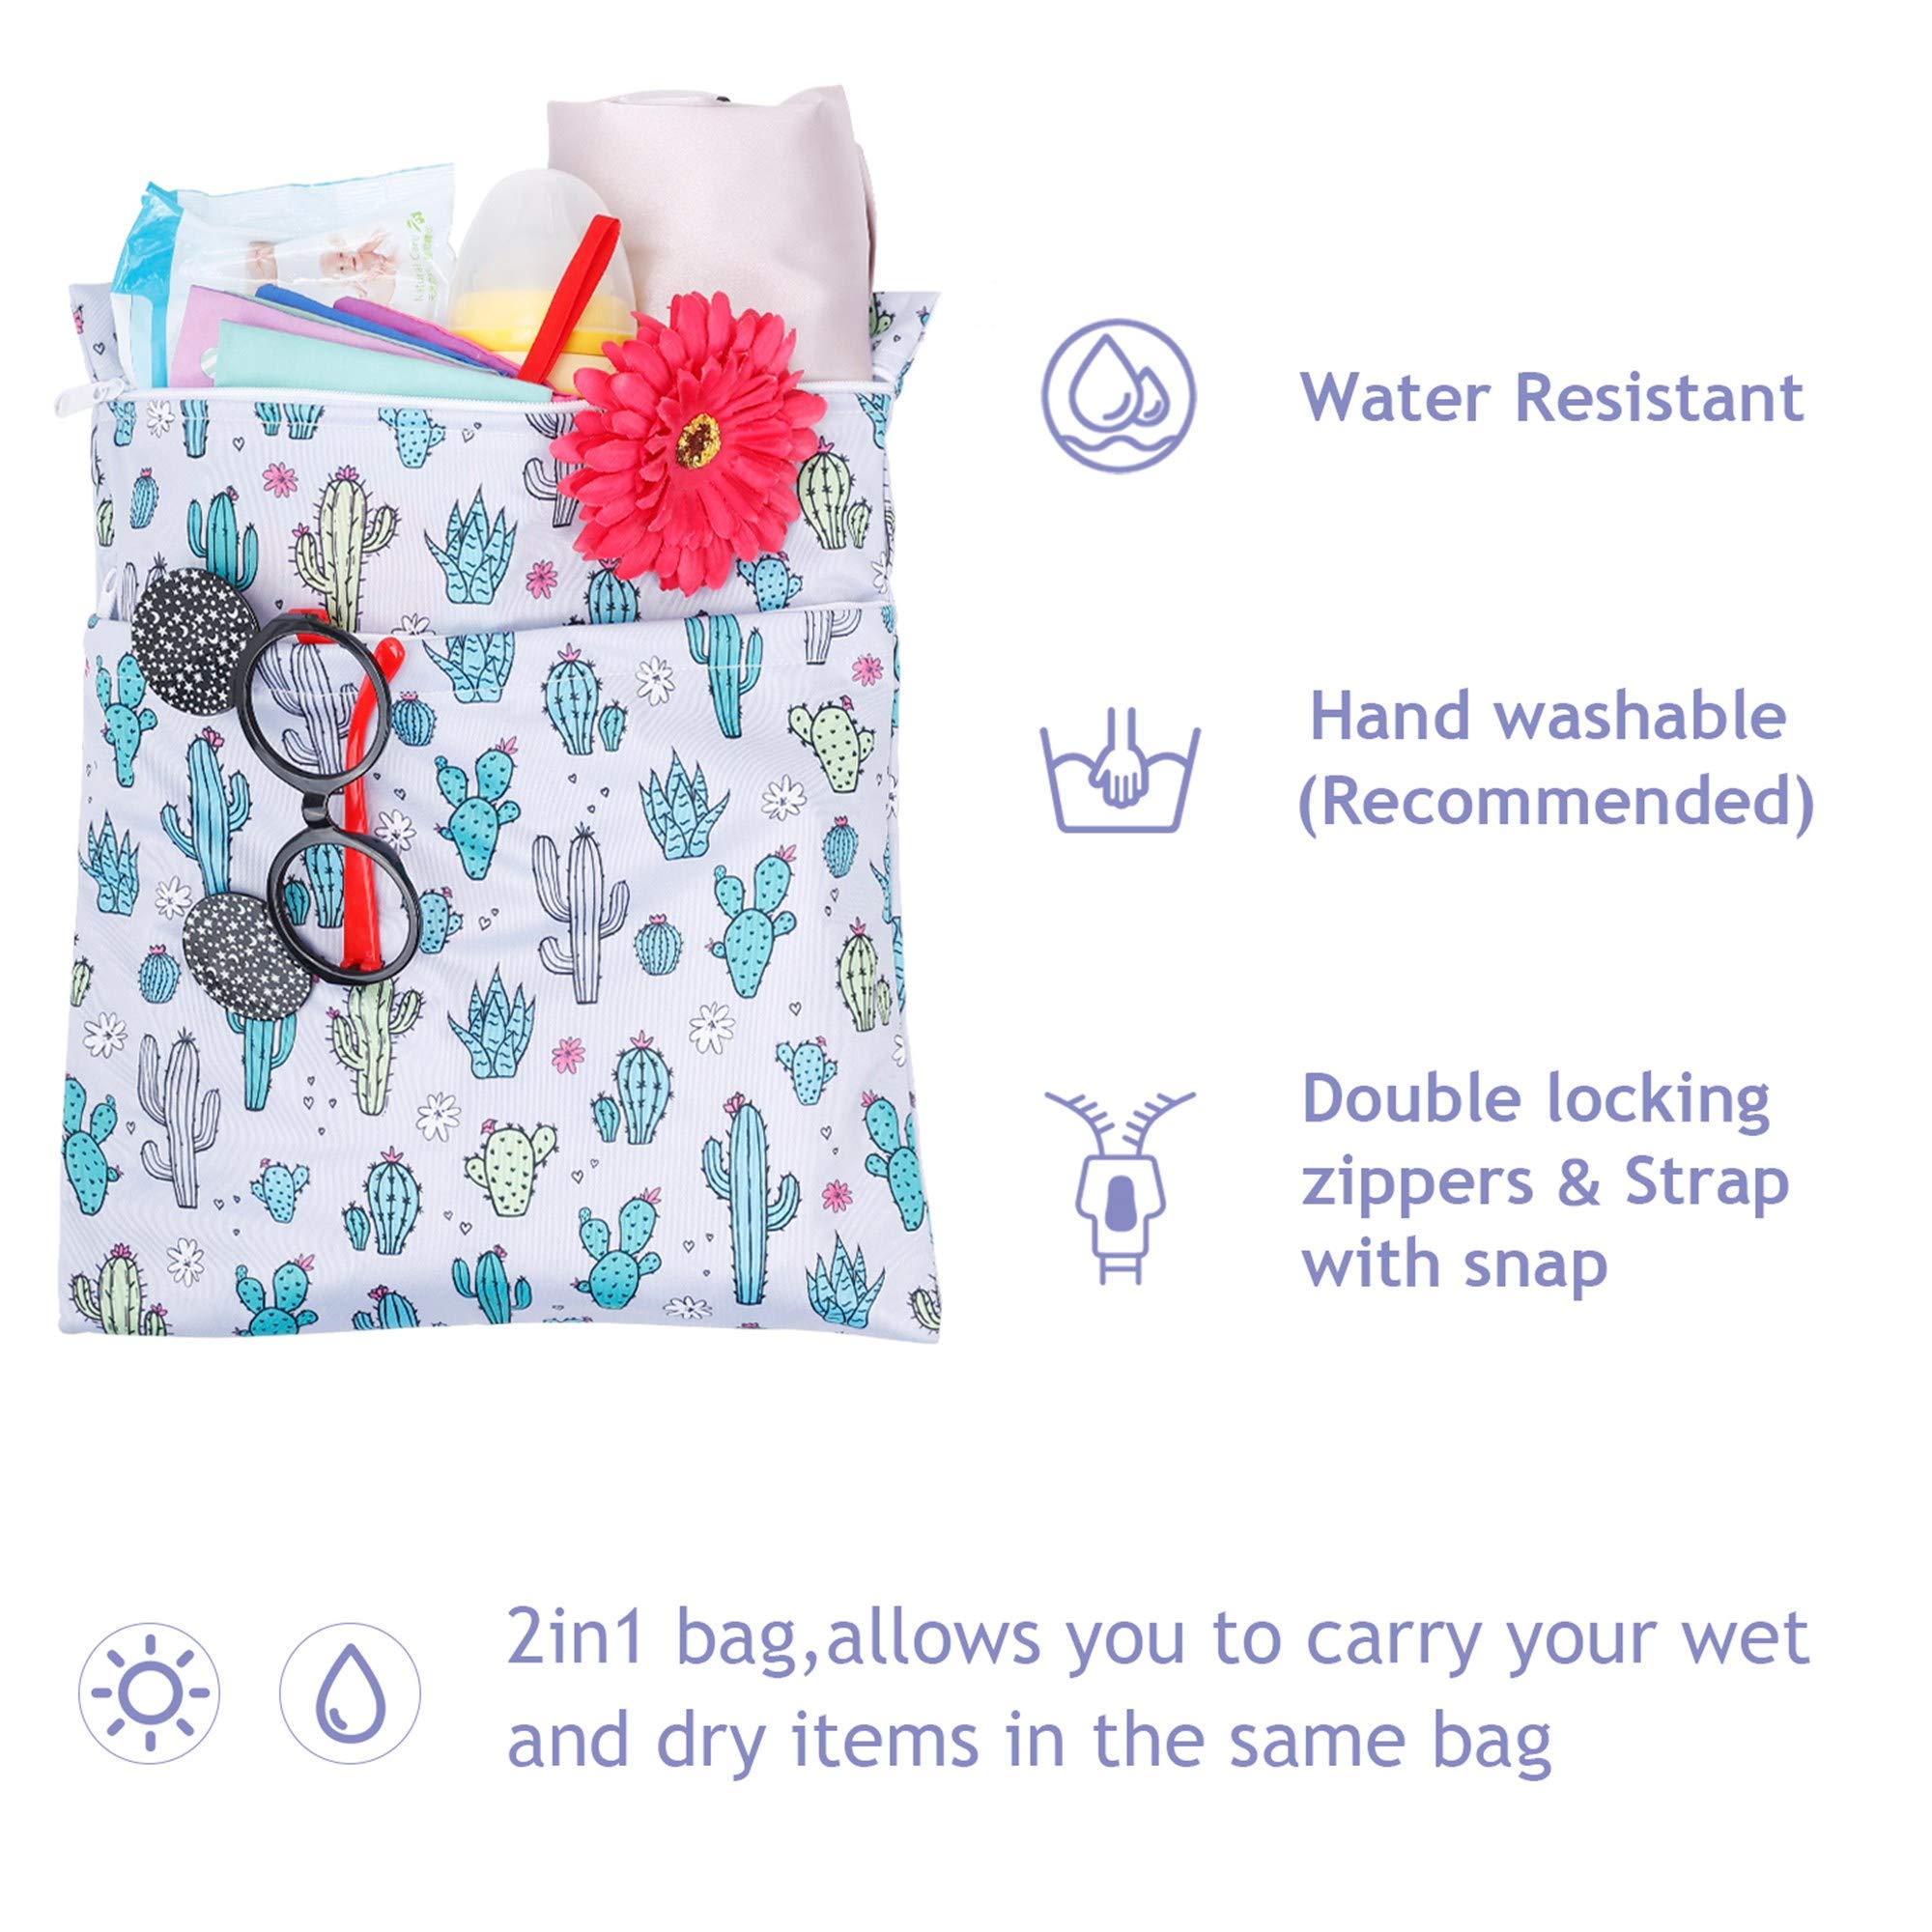 TRENSOM Wet Dry Bag for Breast Pump Parts Waterproof Reusable bags with Two Zippered Pockets Heart Cactus Wet Bag for Cloth Diapers Travel Beach Pool Yoga Gym Bag for Swimsuits Wet Clothes 2 pcs